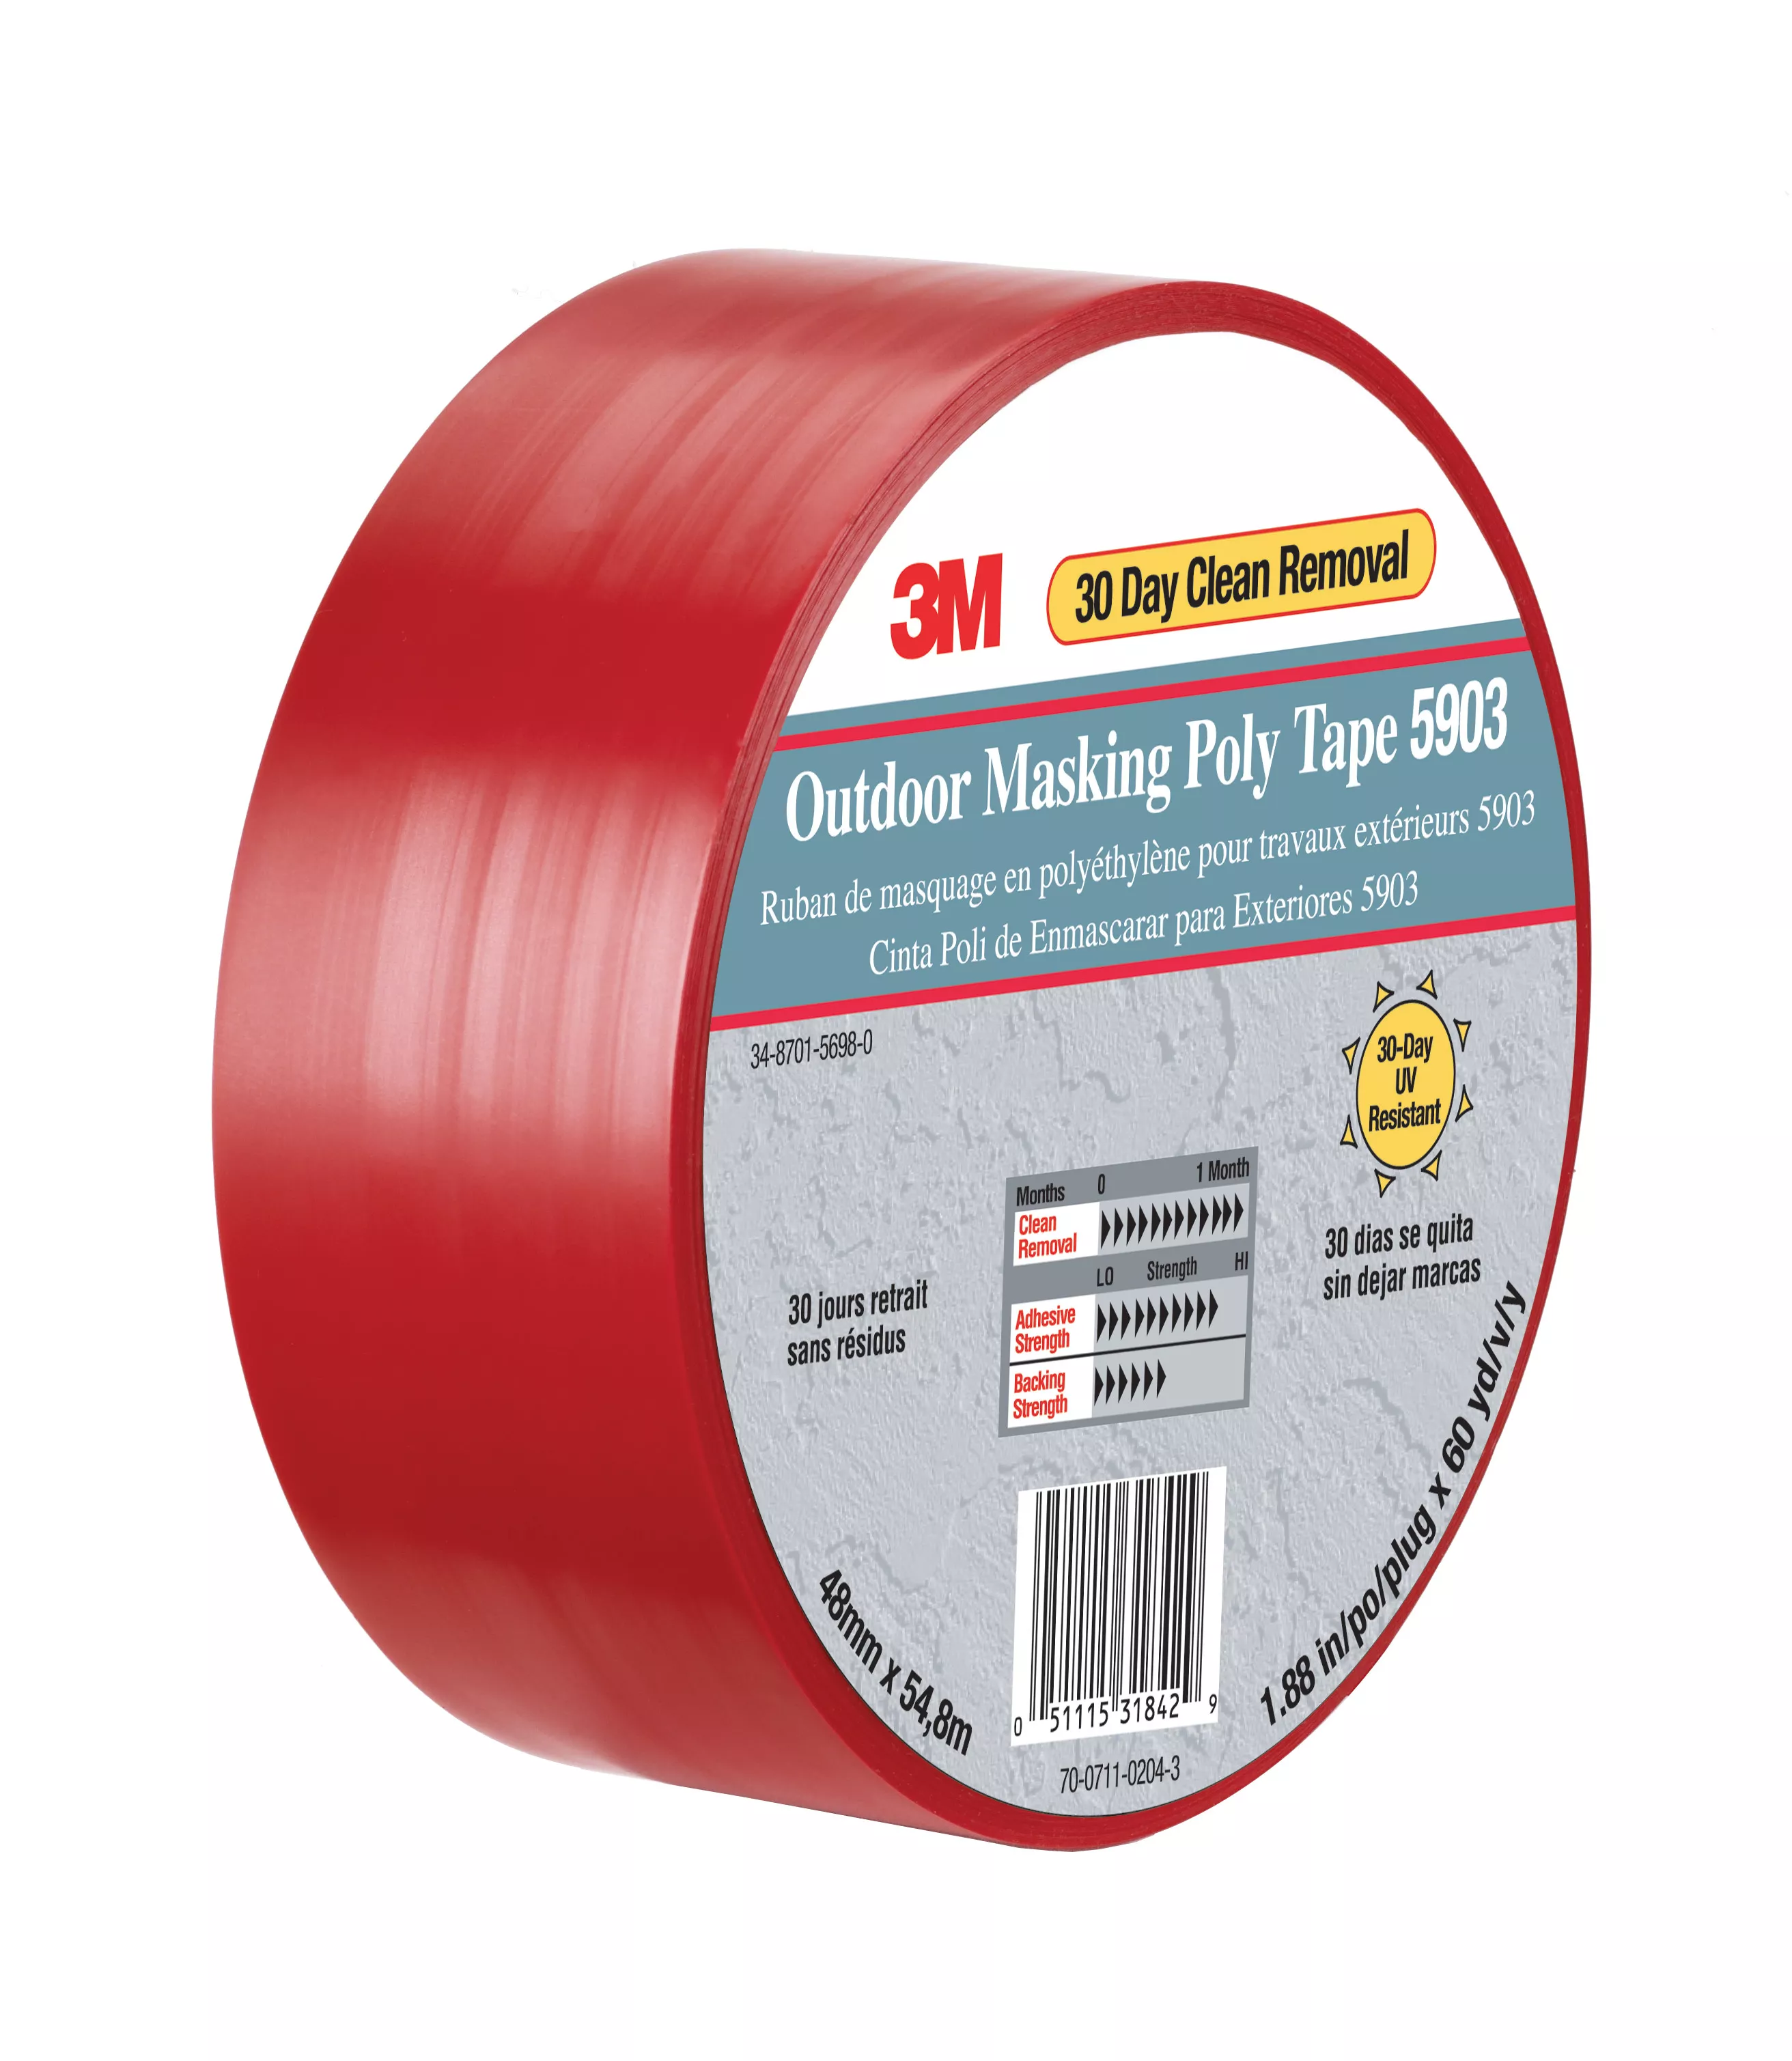 3M™ Outdoor Masking Poly Tape 5903, Red, 50 in x 60 yd, 4/Case